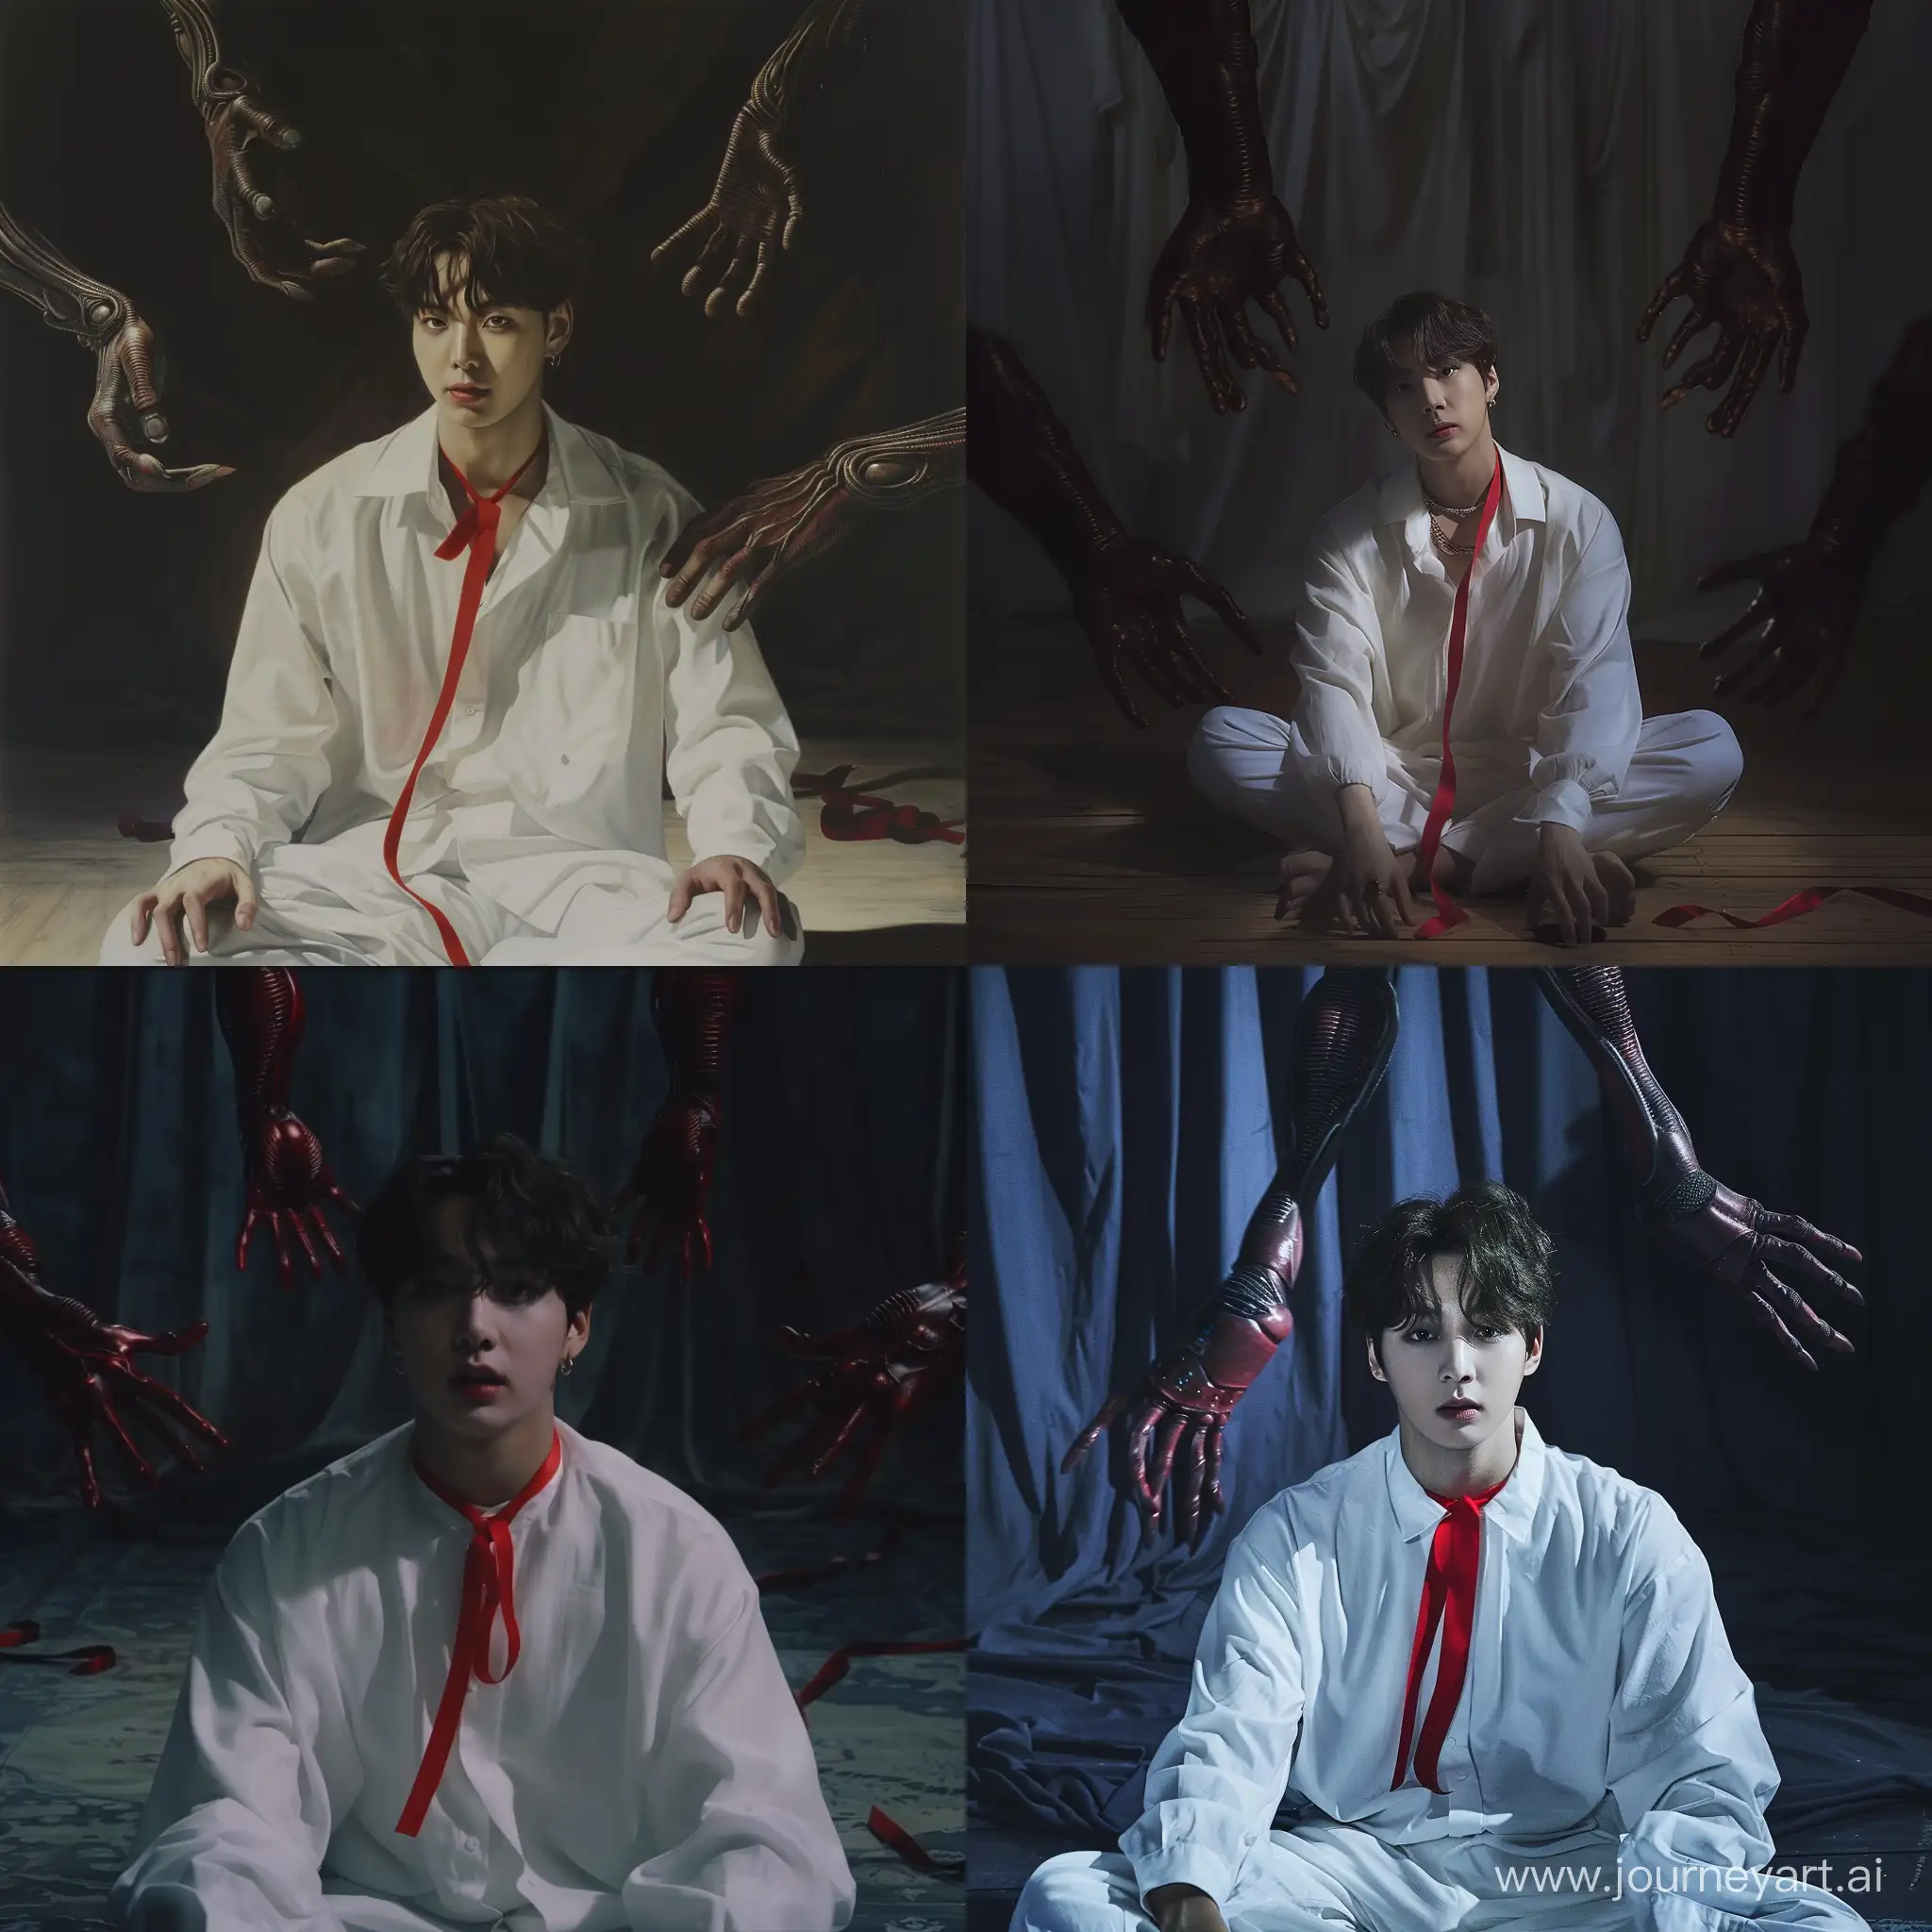 Sly-Jungkook-with-Red-Ribbon-in-Mysterious-Surroundings